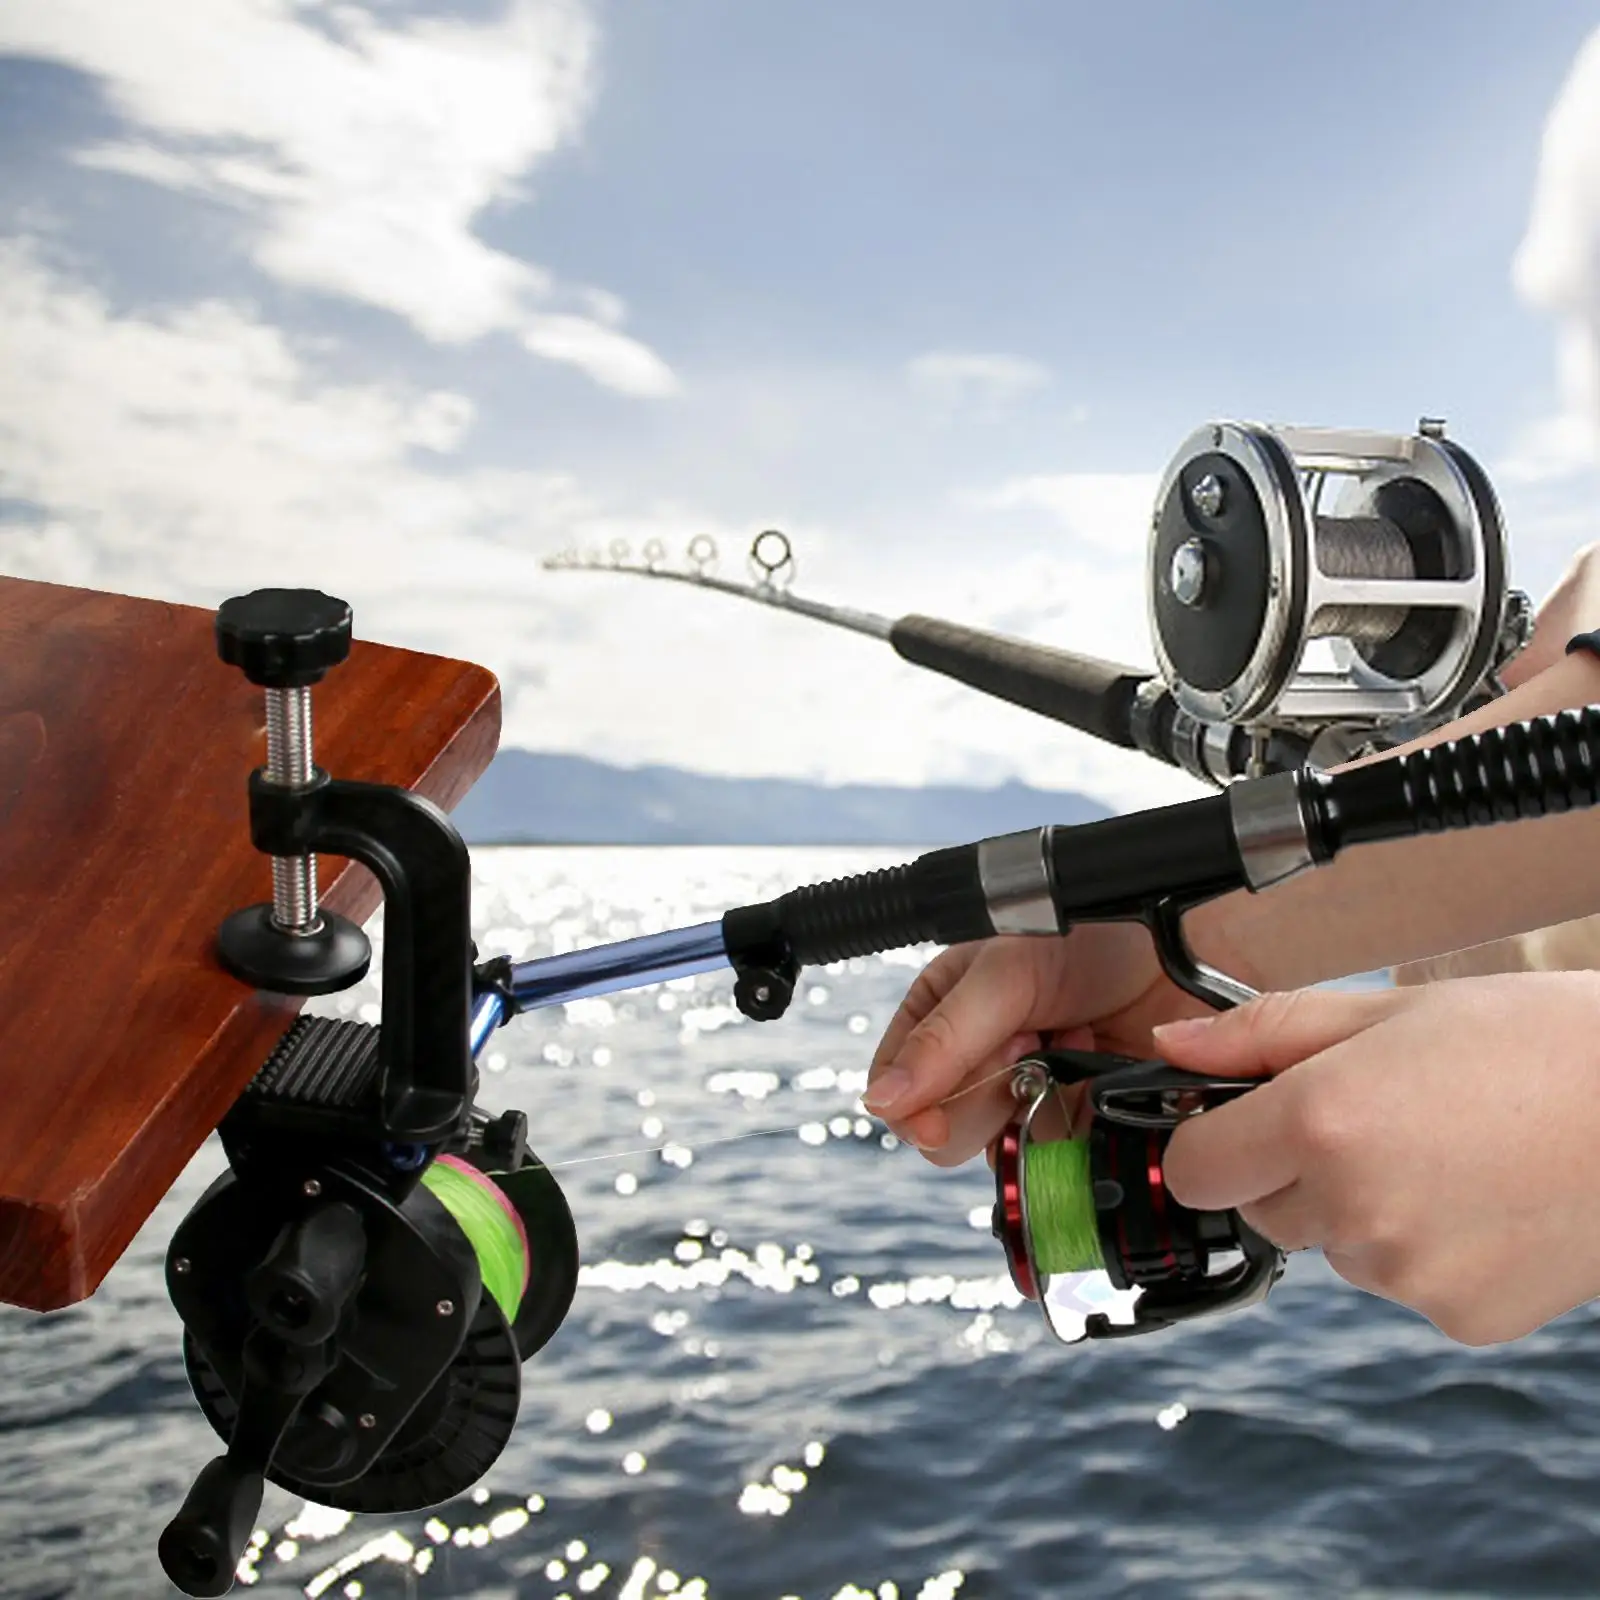 https://ae01.alicdn.com/kf/S784fe48c8d324c408fac6e75f5d761c5W/Fishing-Line-Spooler-Winder-Handheld-Tackle-Attachments-Sturdy-Portable-Adjustable-Fishing-Reel-Spooler-for-Boat-Fishing.jpg